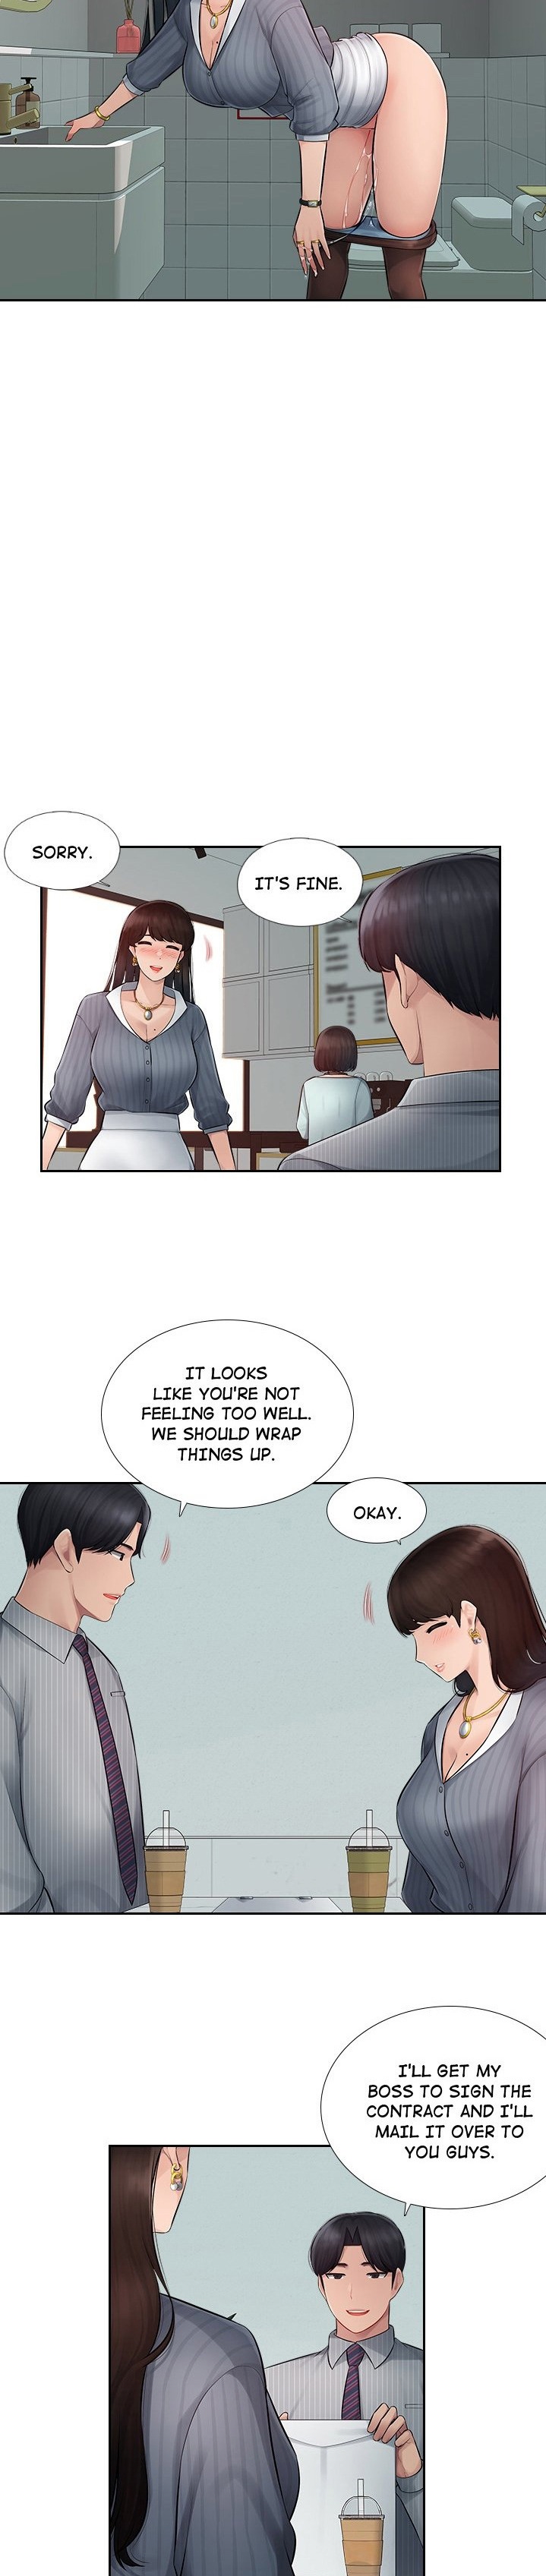 Office Desires - Chapter 1 Page 15